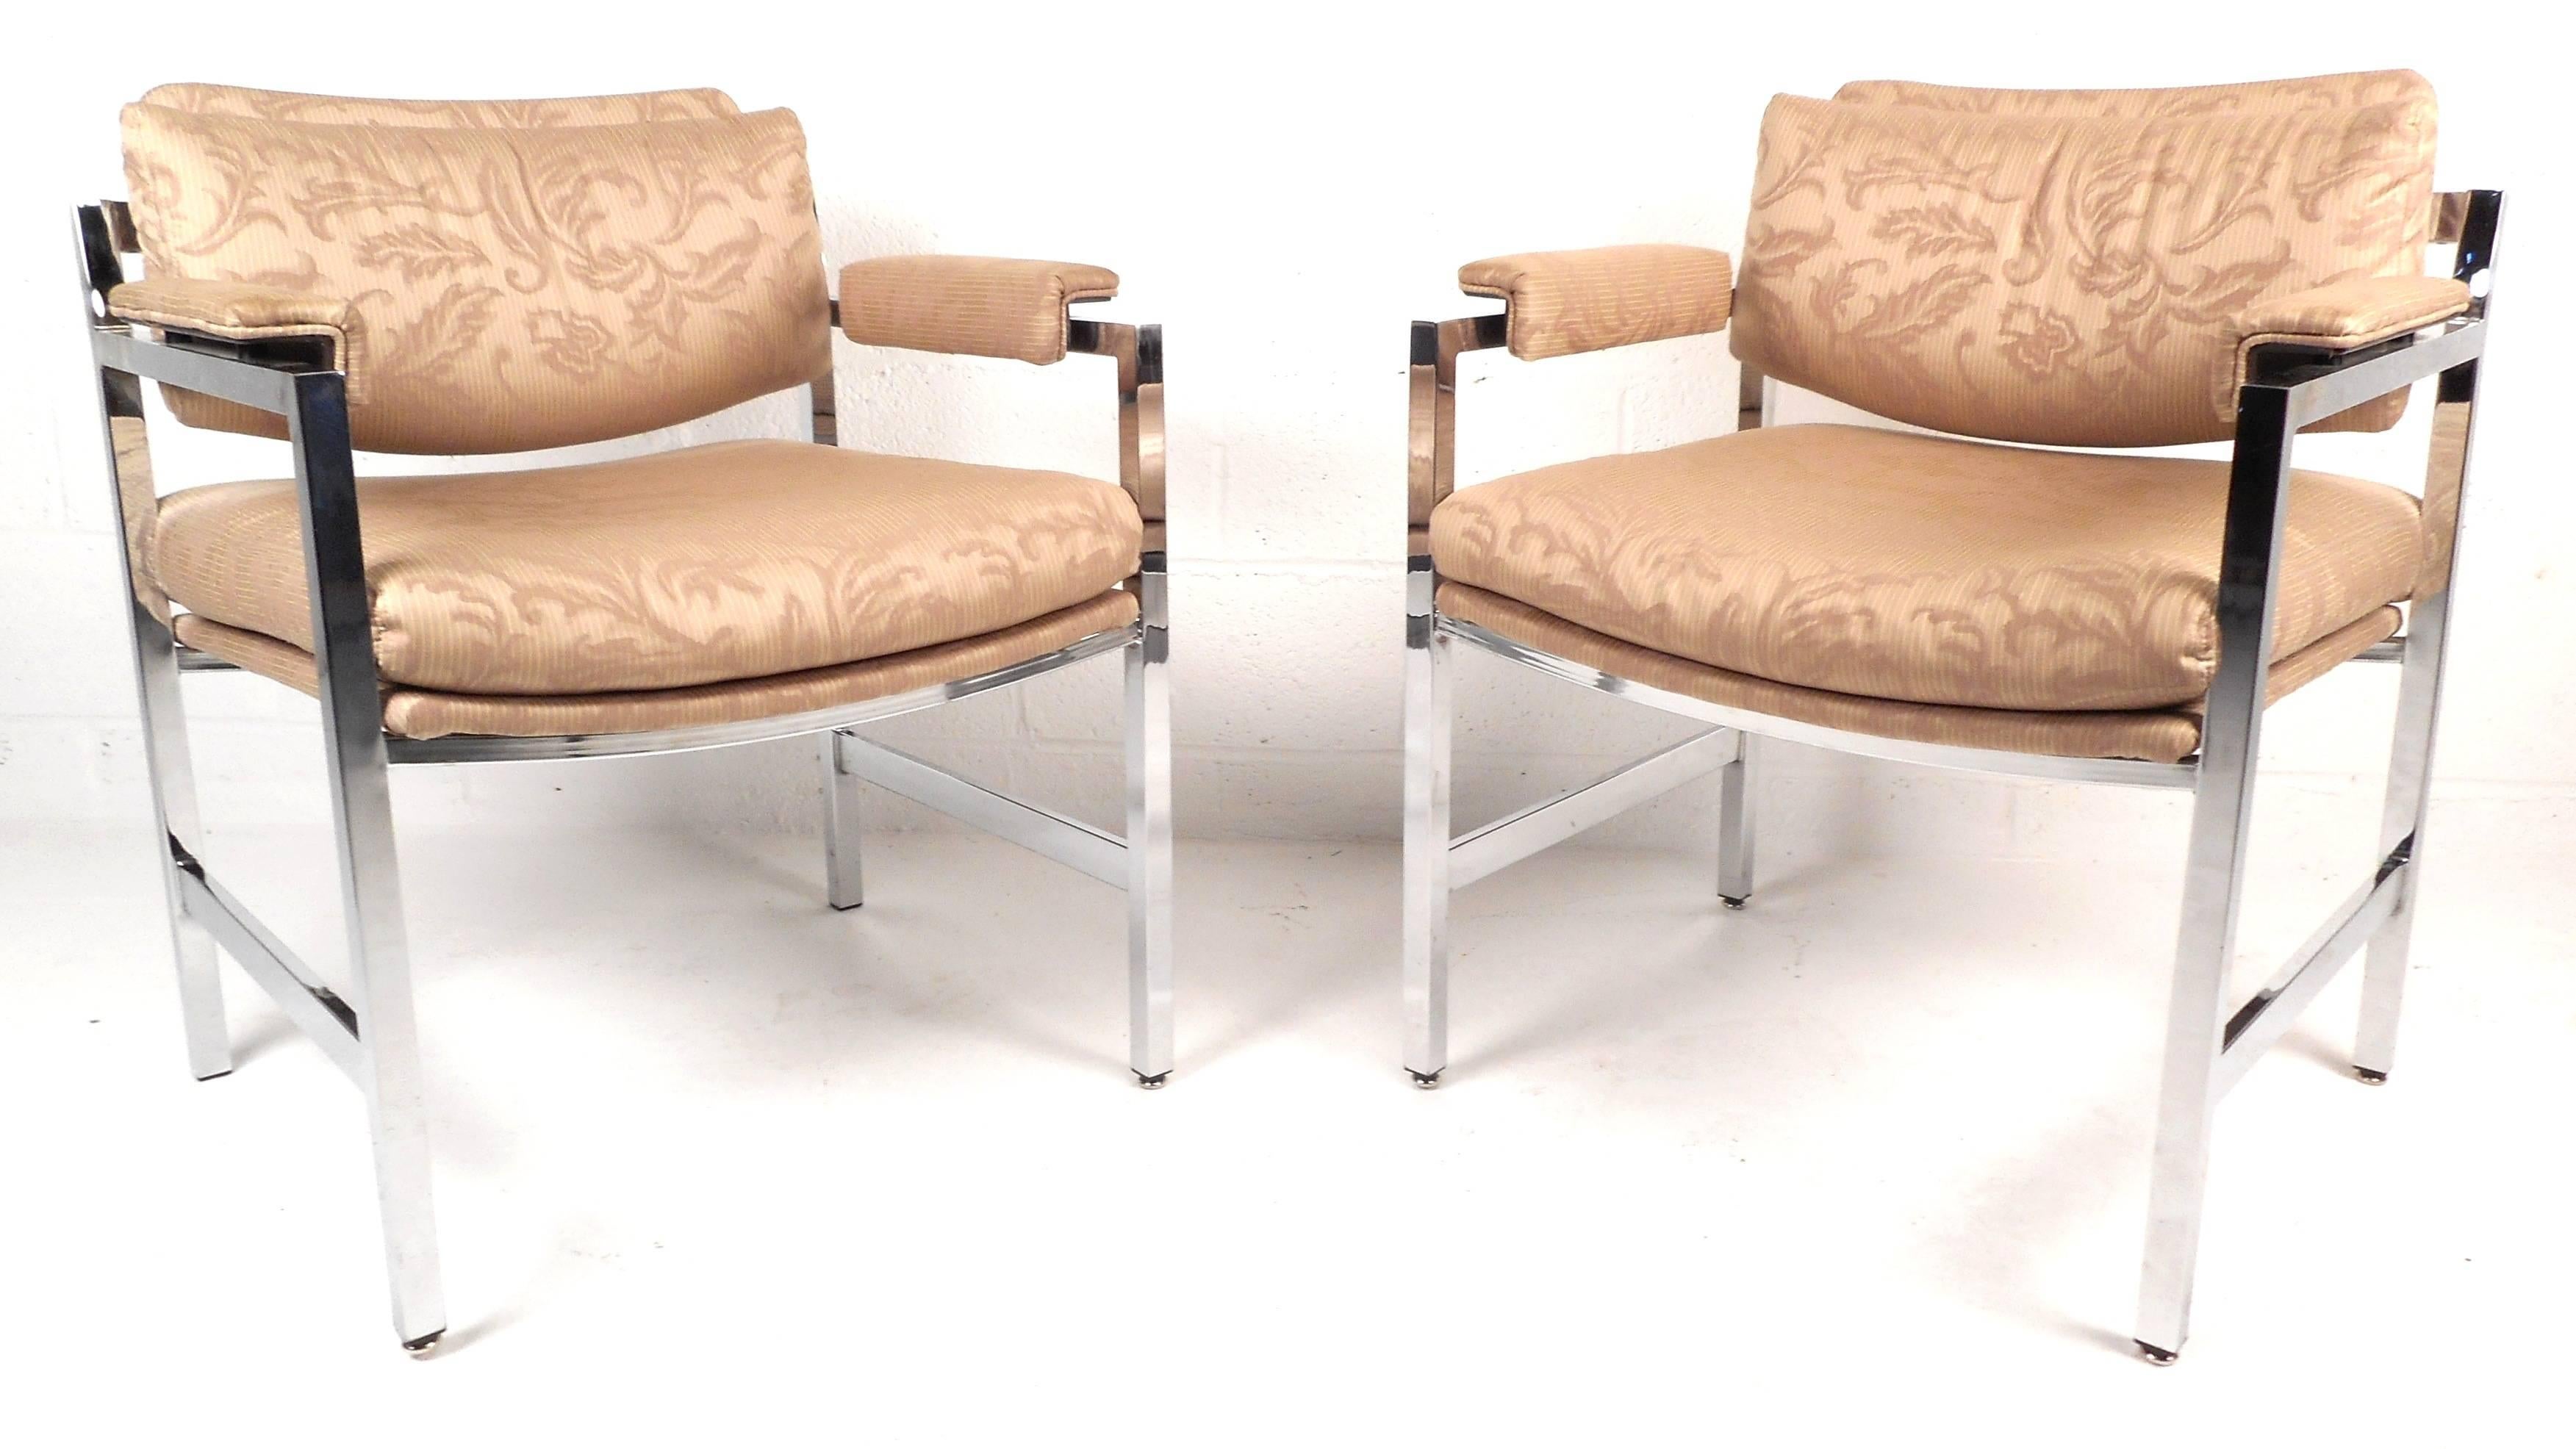 This elegant pair of vintage modern chrome frame arm chairs feature comfortable upholstered armrests with unique designs on the fabric. The thick padded seat and back rest ensure maximum comfort in any seating arrangement. The heavy chrome frame